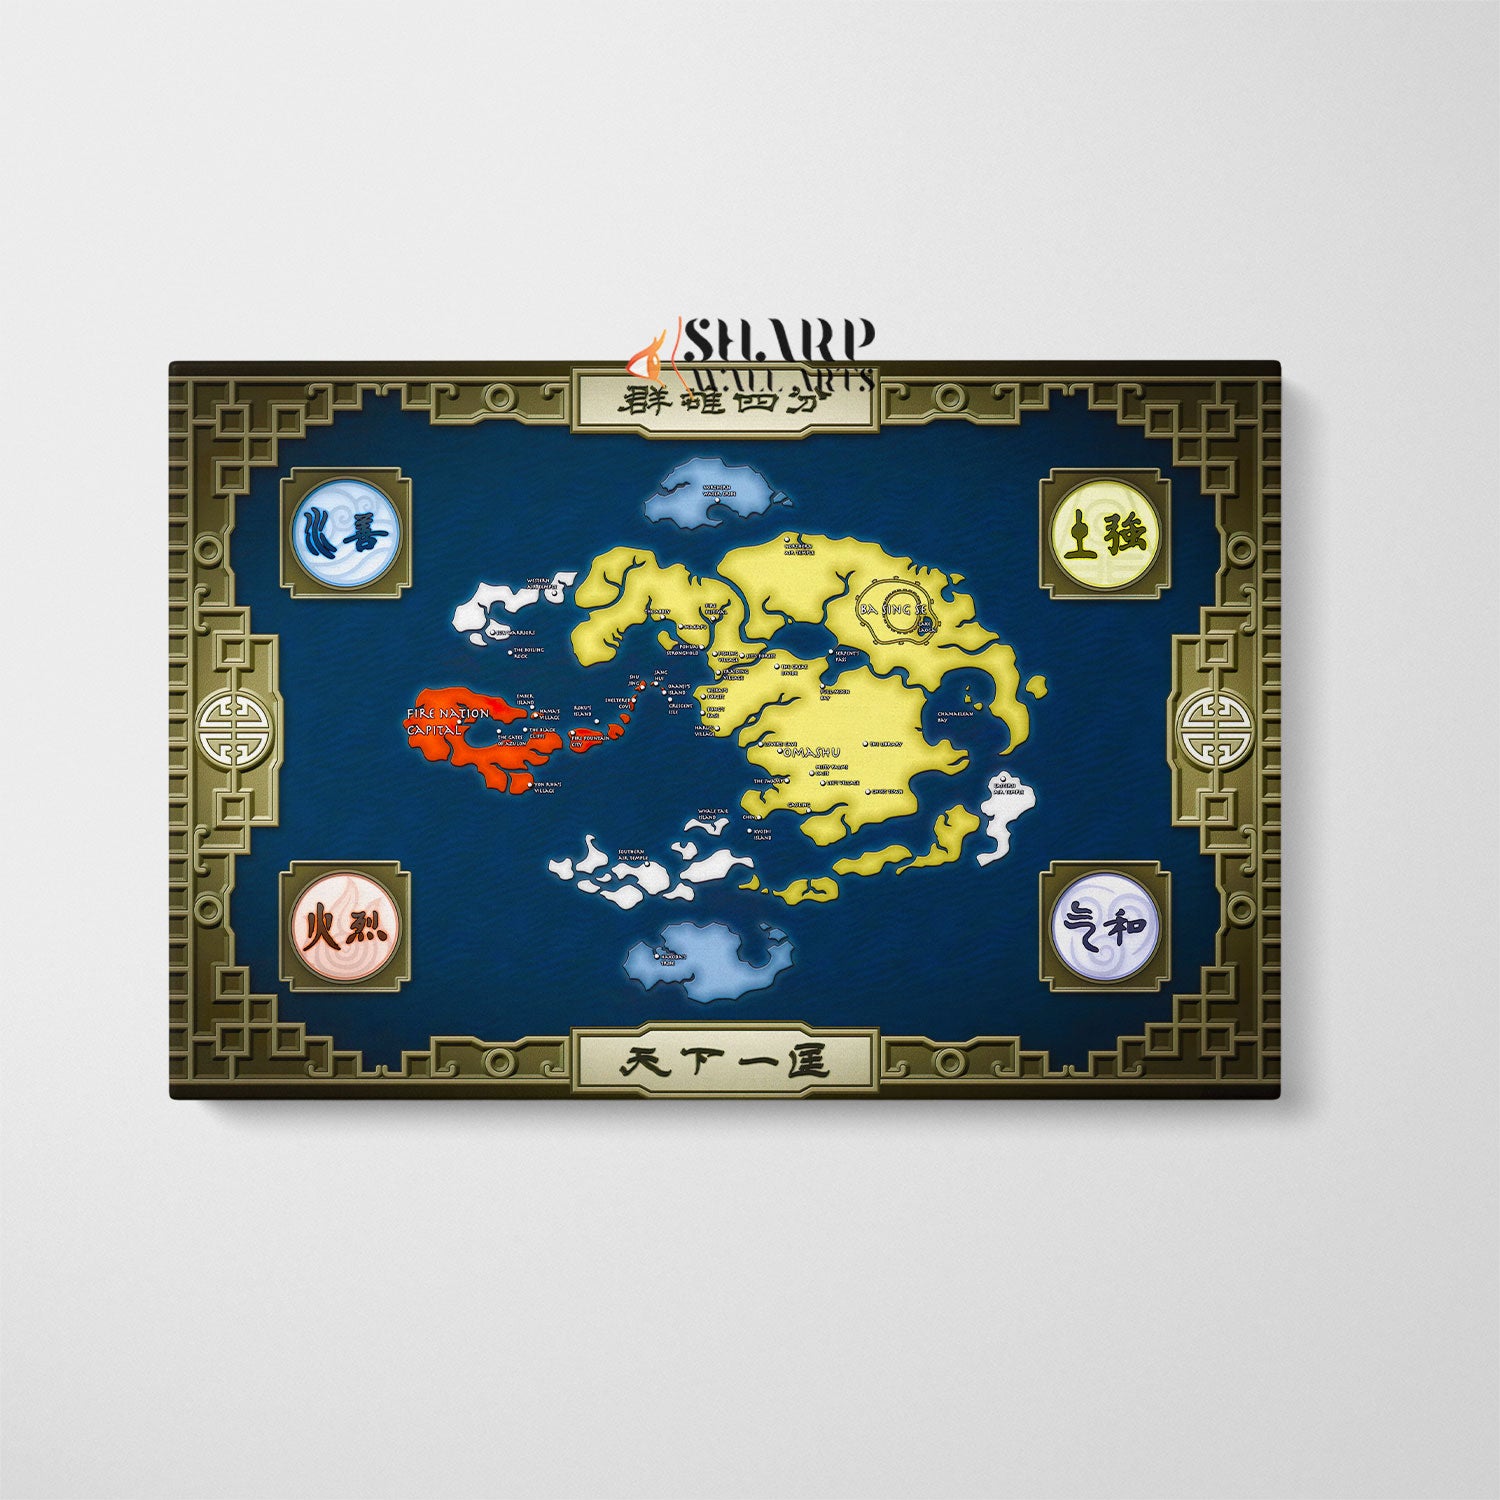 Avatar Four Nations Map Canvas Wall Art